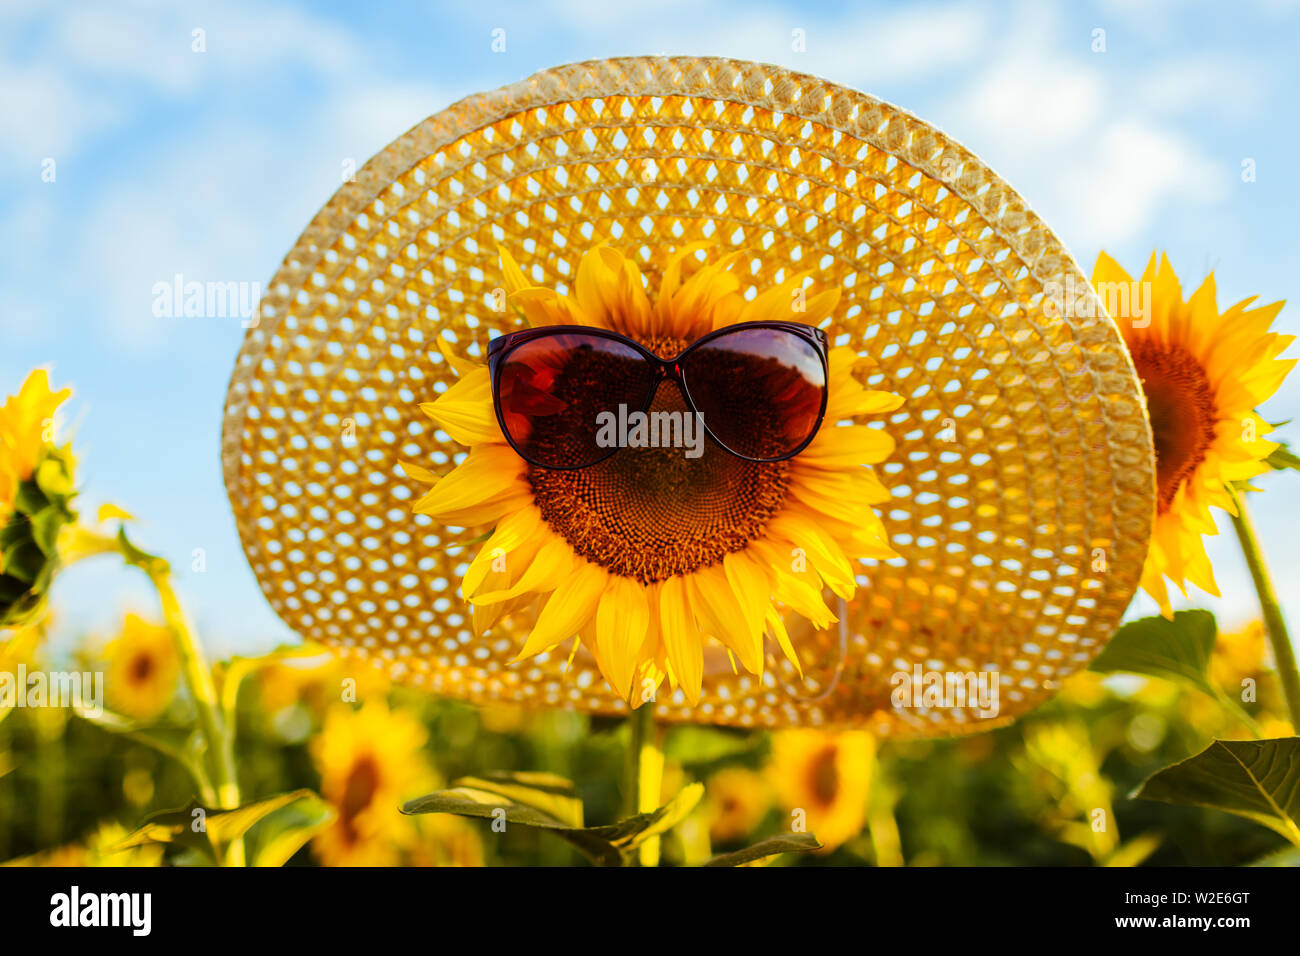 Blooming sunflower in sunglasses and straw hat growing in summer field. Summer vacation Stock Photo